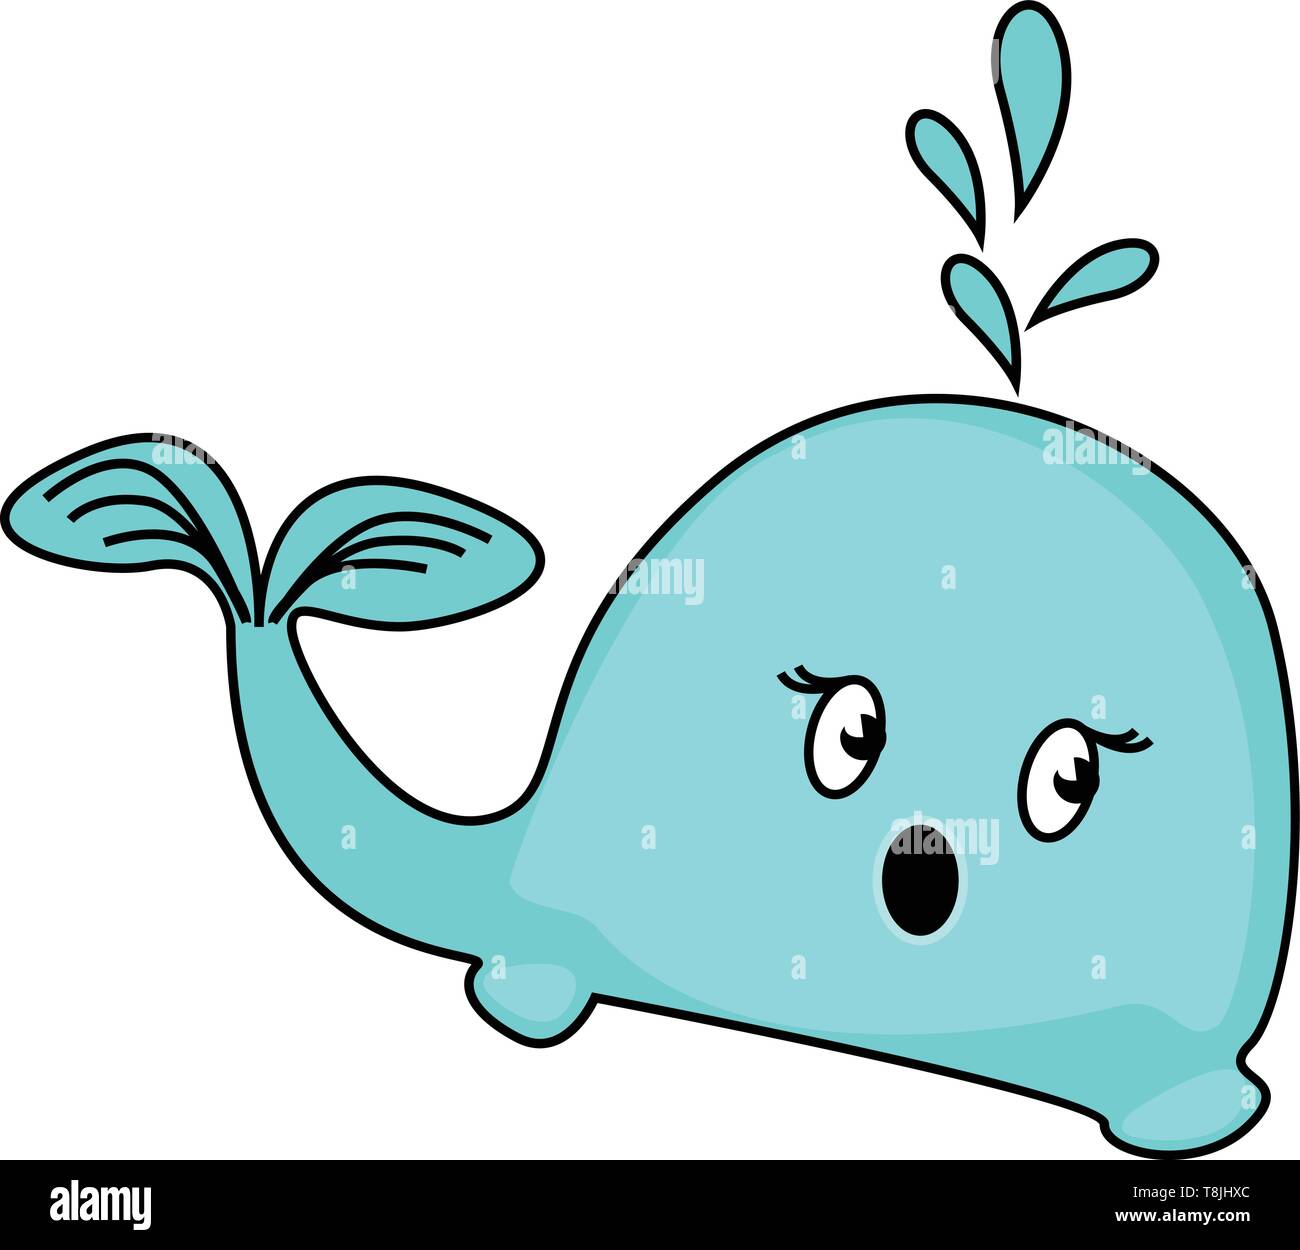 A blue fish cuty cit using its blow hole to spray water, vector, color drawing or illustration. Stock Vector